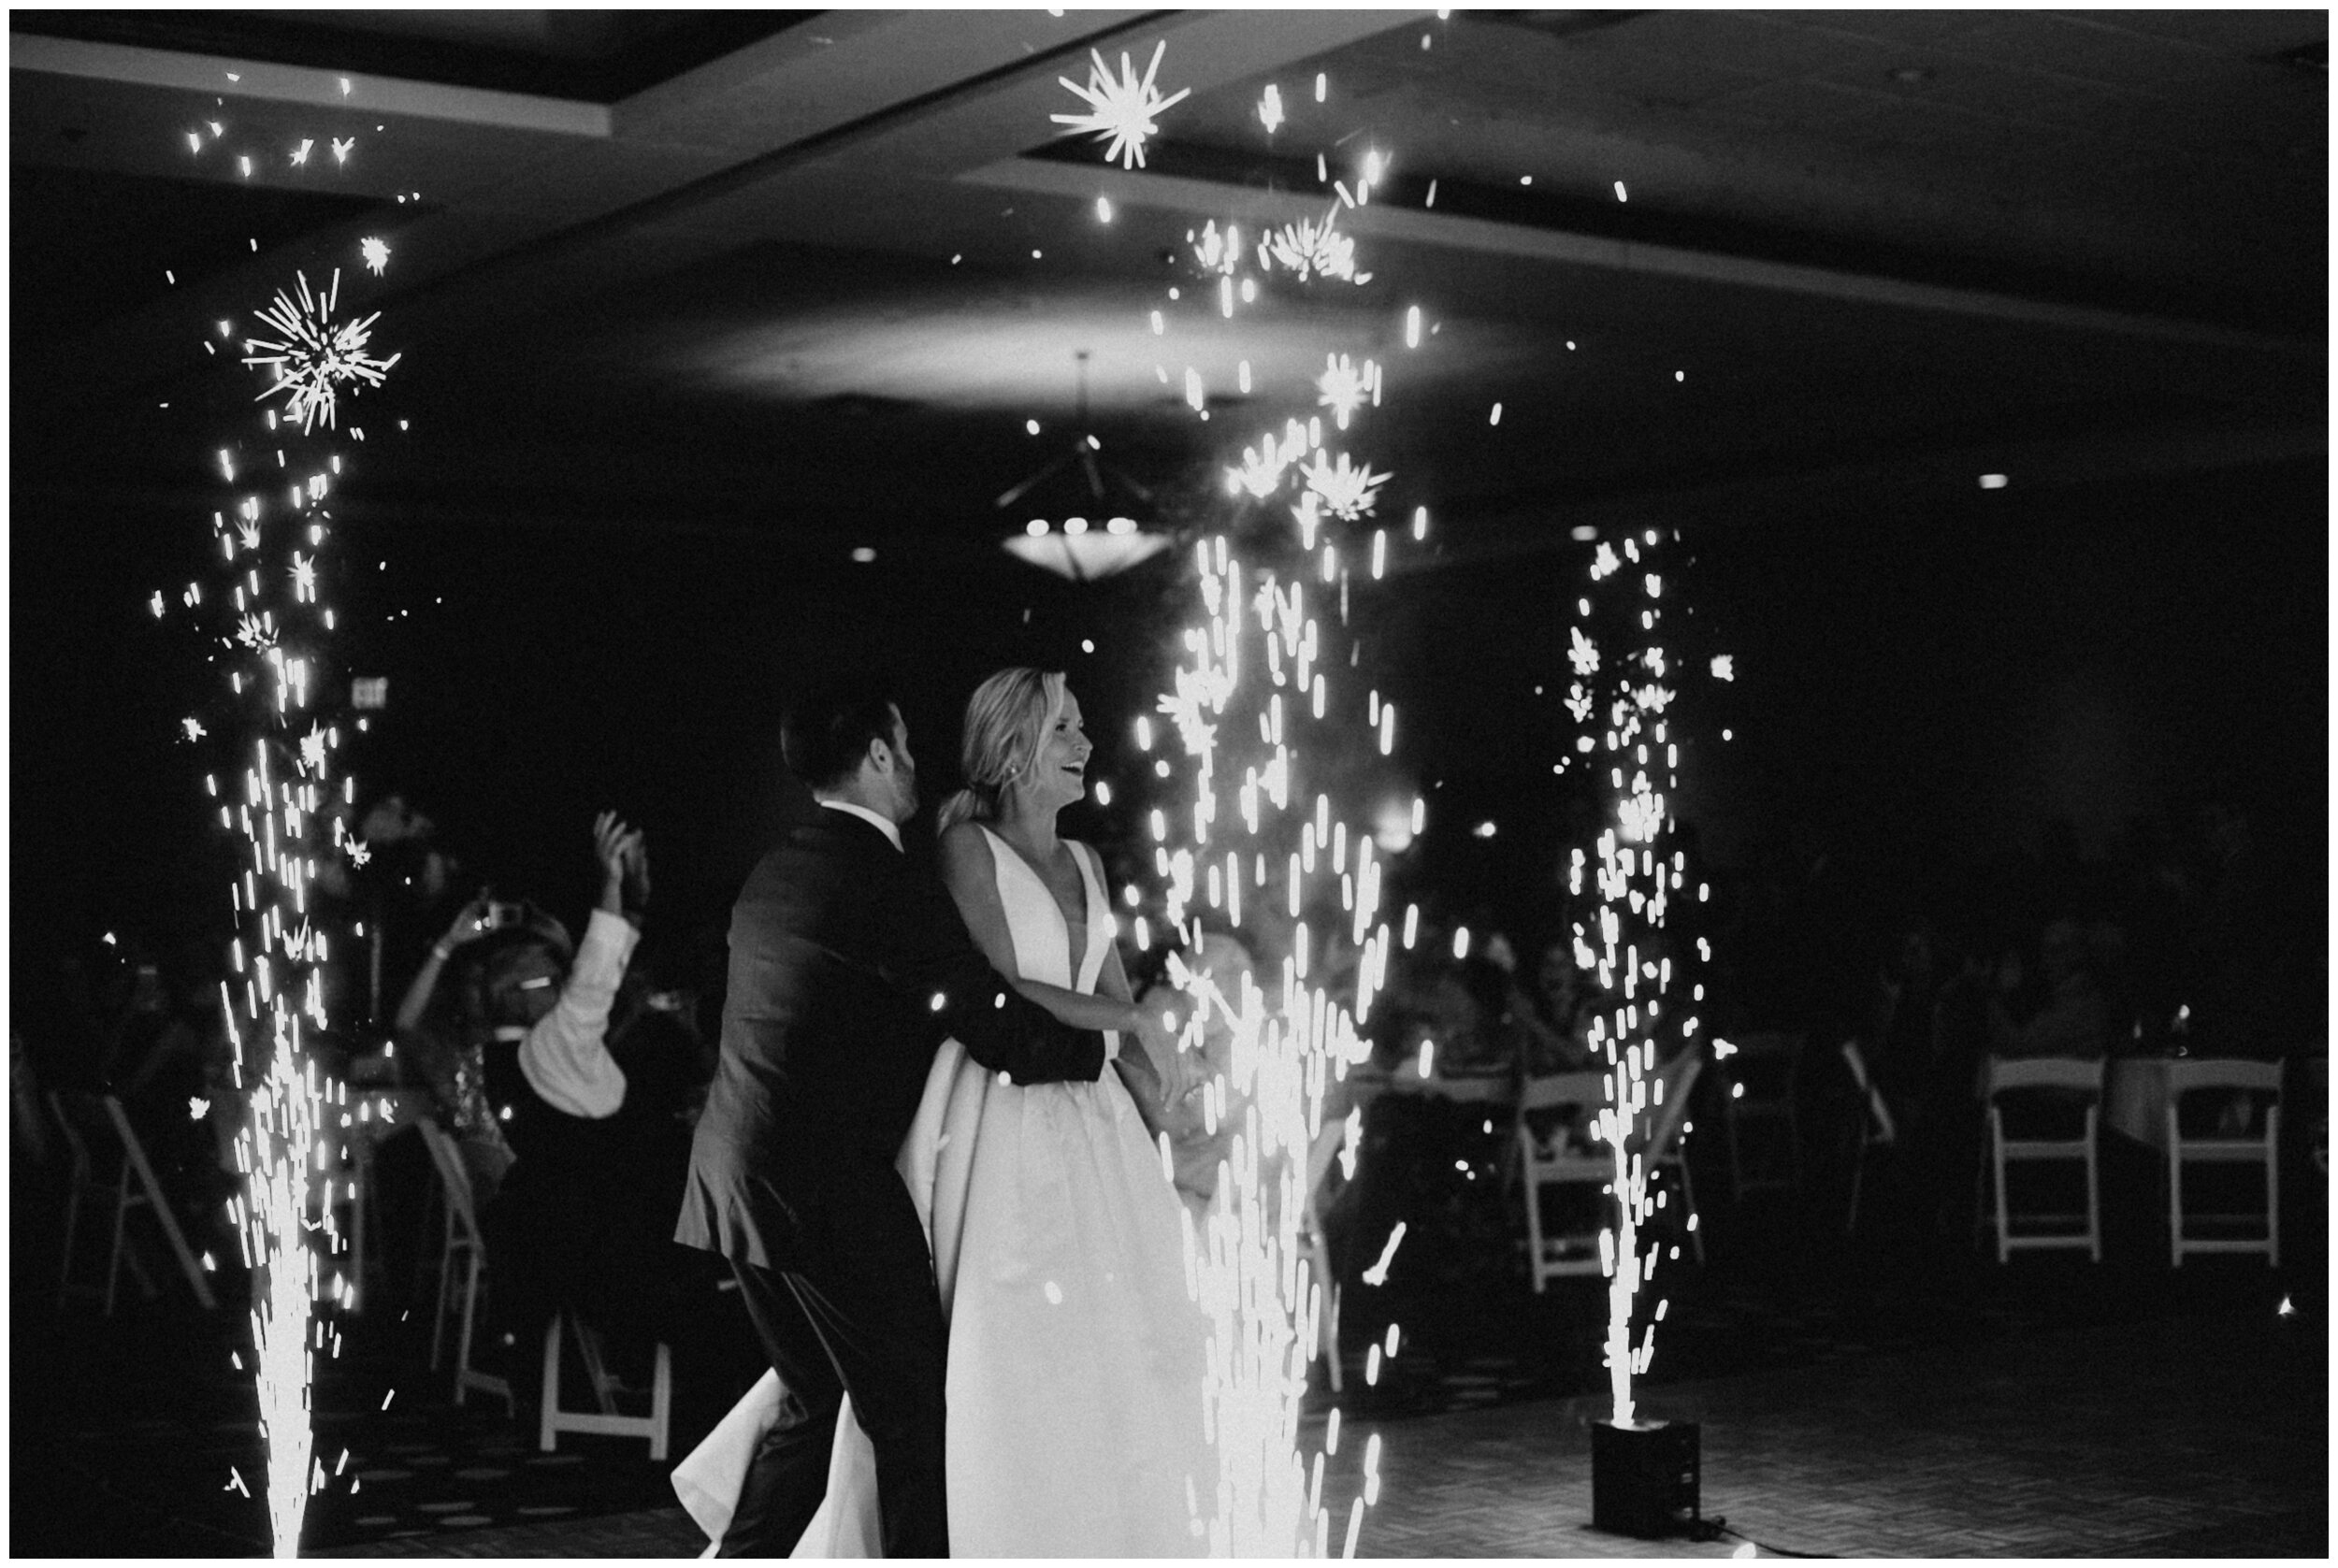 Bride and groom surprise sparkler wedding reception entrance at Grand View Lodge in Nisswa, Minnesota